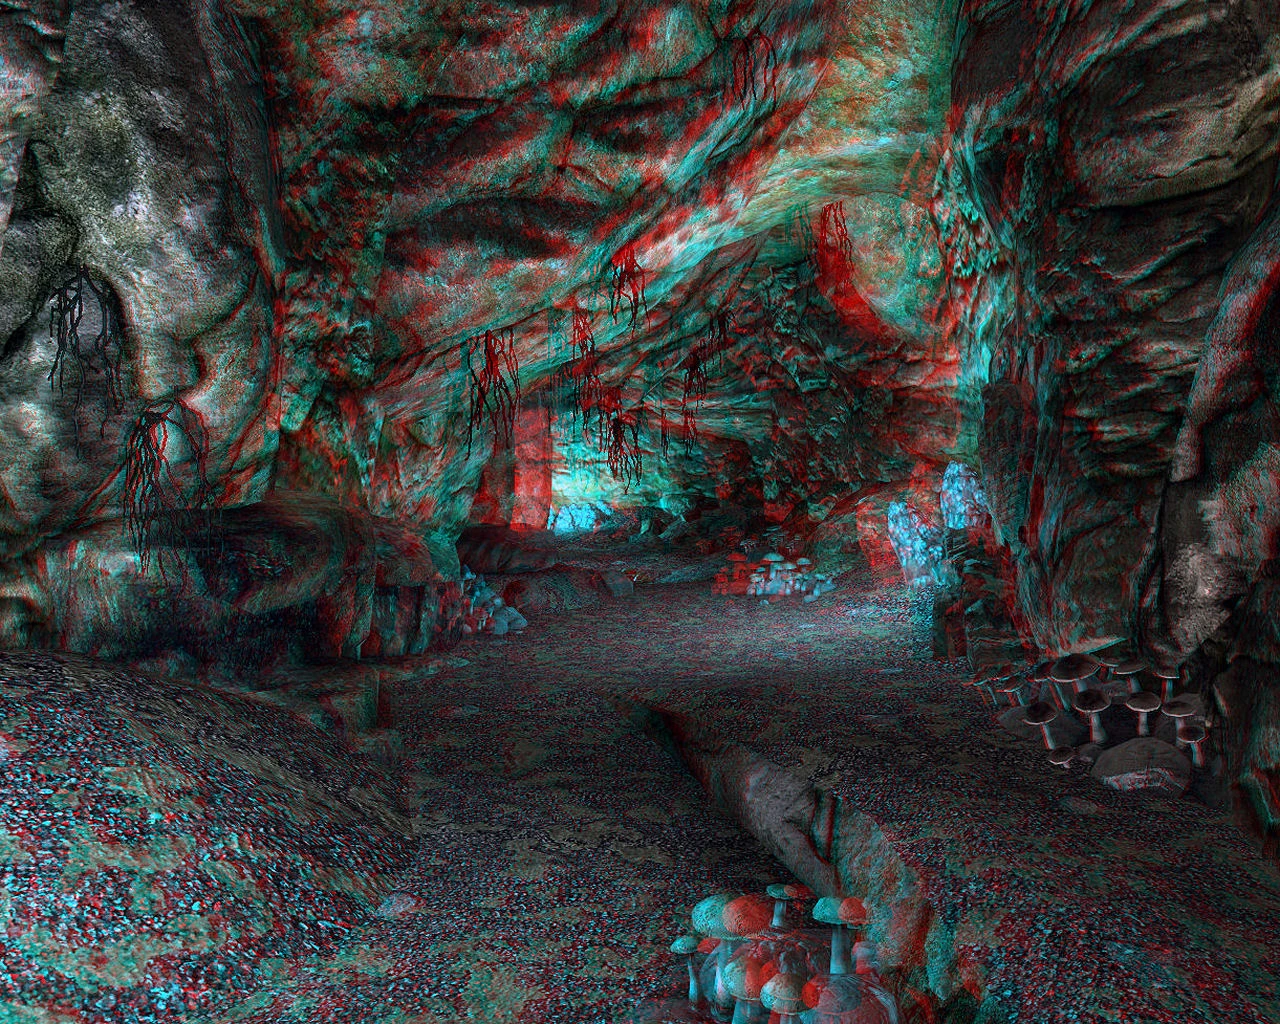 Tolvads Crossing Tunnel in Anaglyphic 3D.